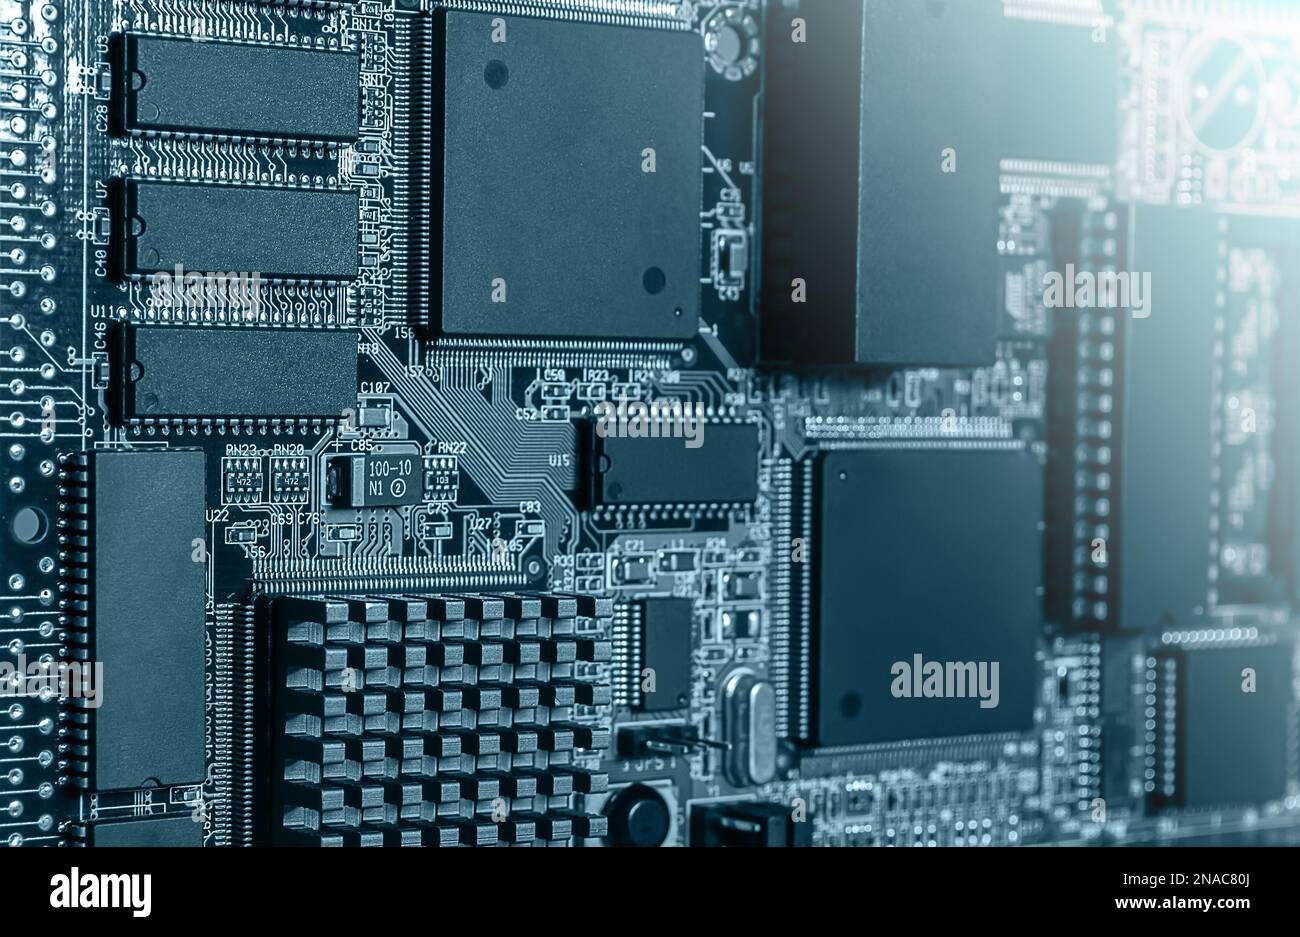 Closeup of Printed Circuit Board with processor, integrated circuits and many other surface mounted passive electrical components. Stock Photo